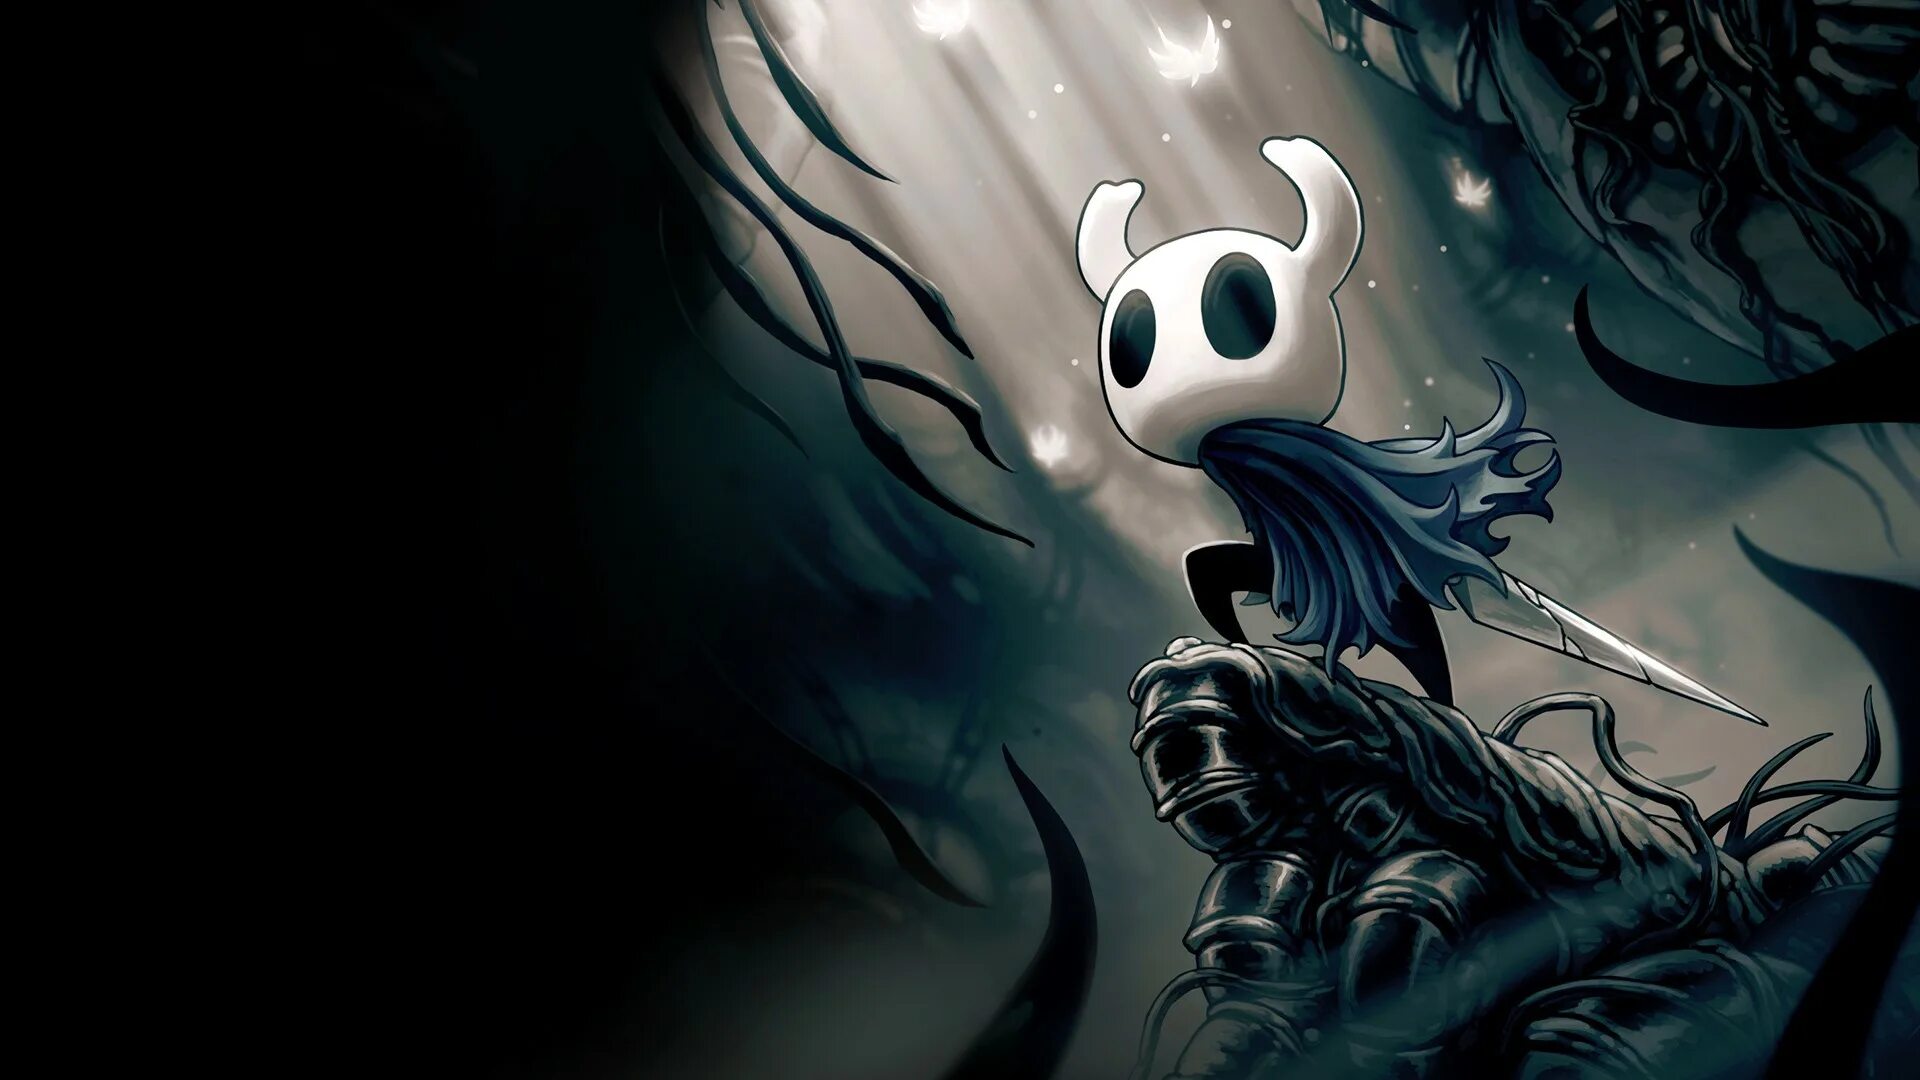 Hollow Knight. Hollow Knight арт. Hollow Knight ps4 диск. Hollow Knight игра.